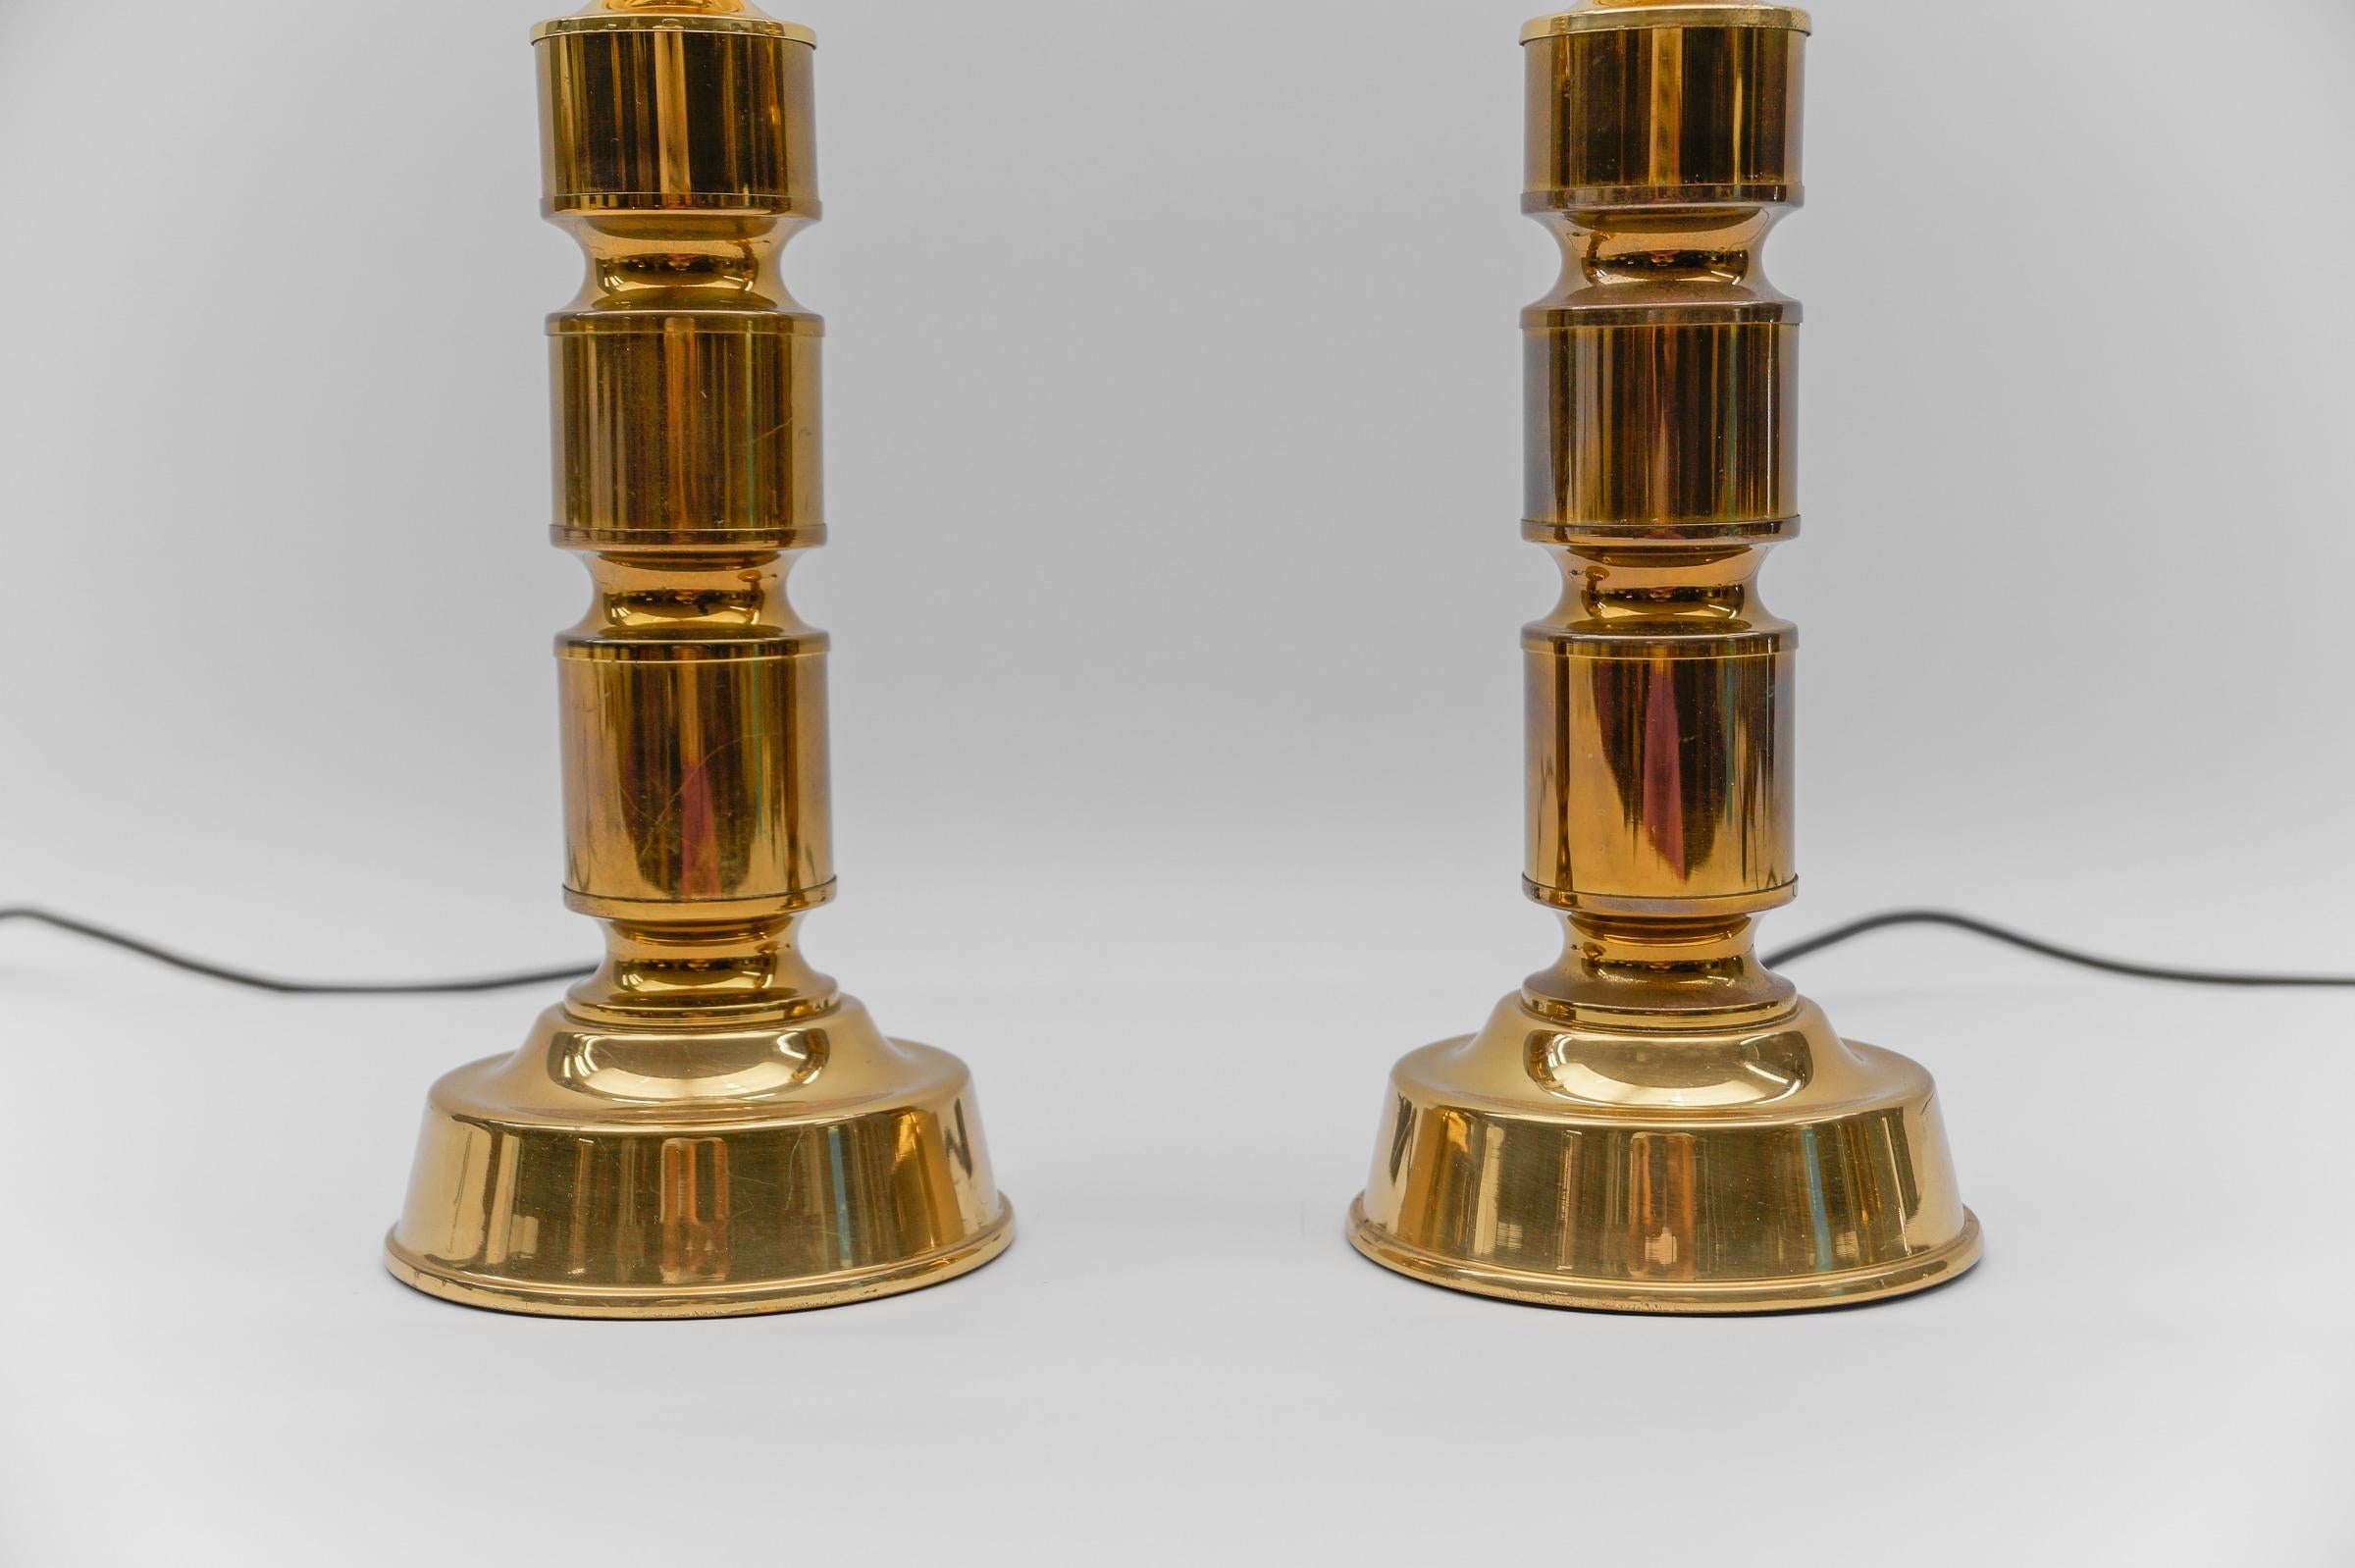 Pair of Mid Century Modern Brass Table Lamp Bases, 1960s For Sale 1